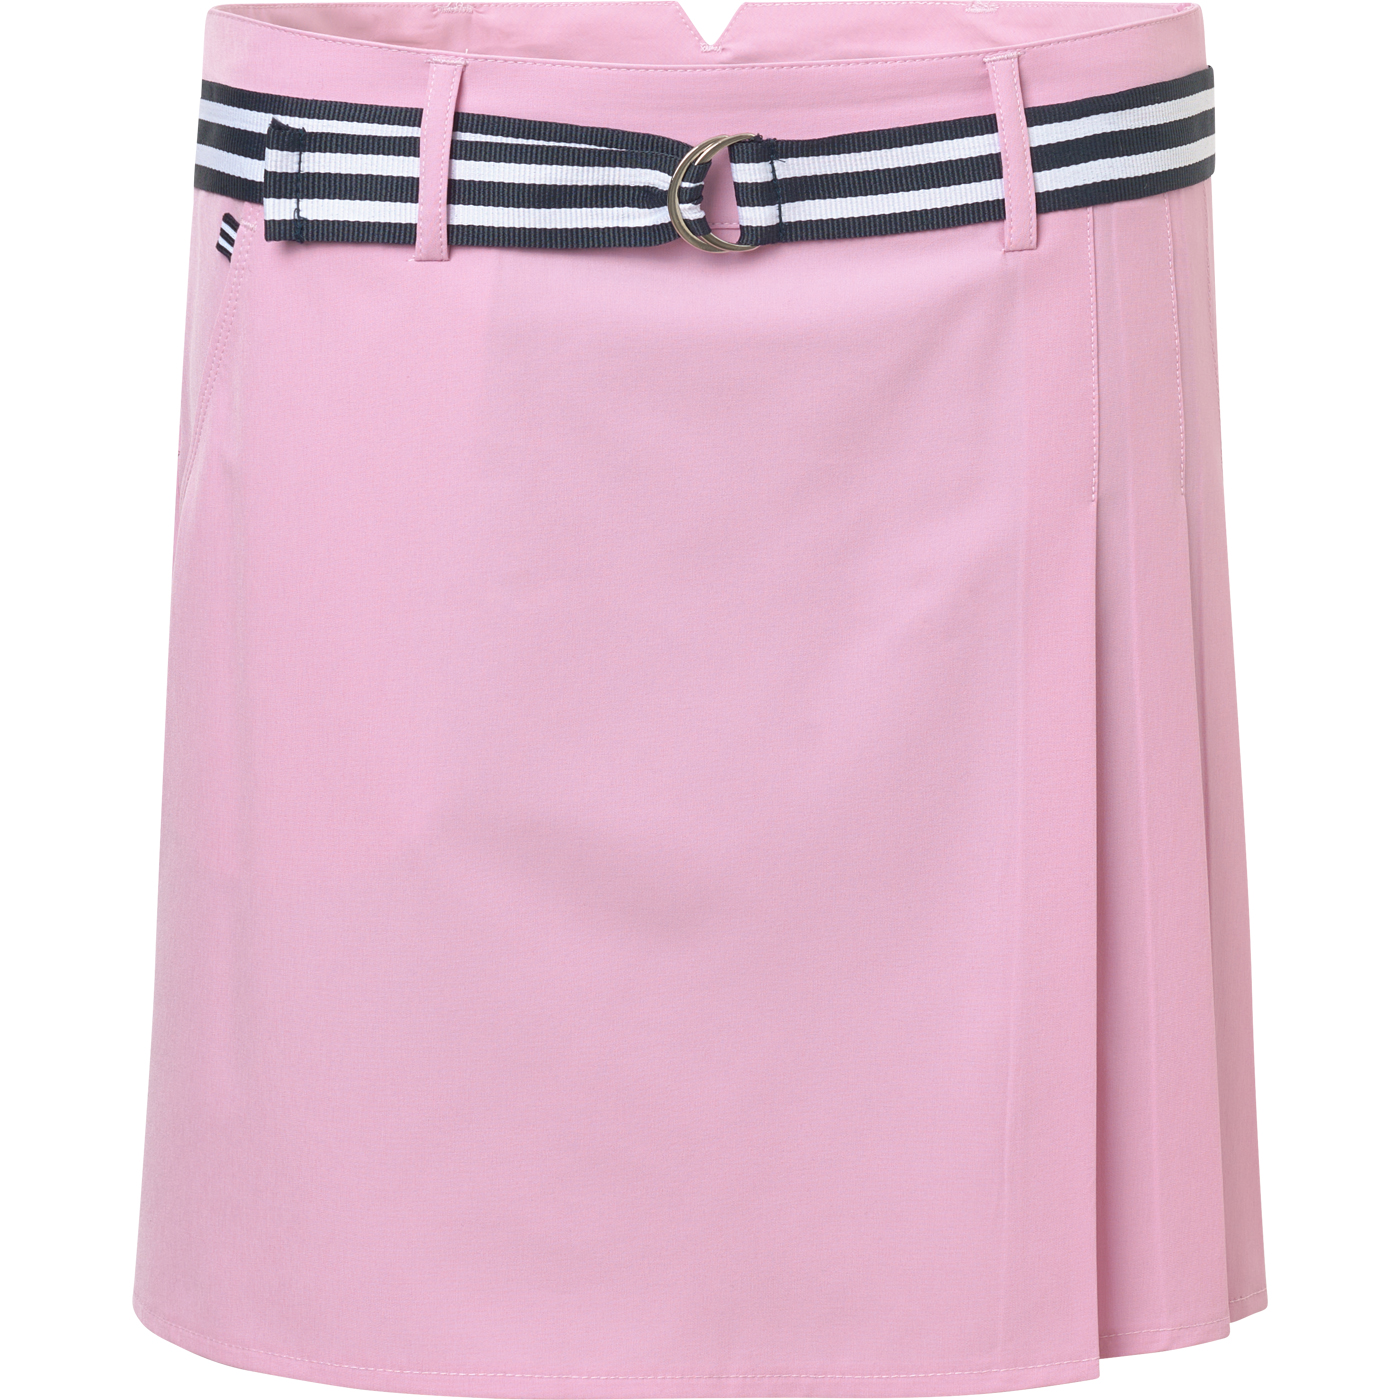 Lds Kildare skort 45cm - peony in the group WOMEN / All clothing at Abacus Sportswear (2978390)